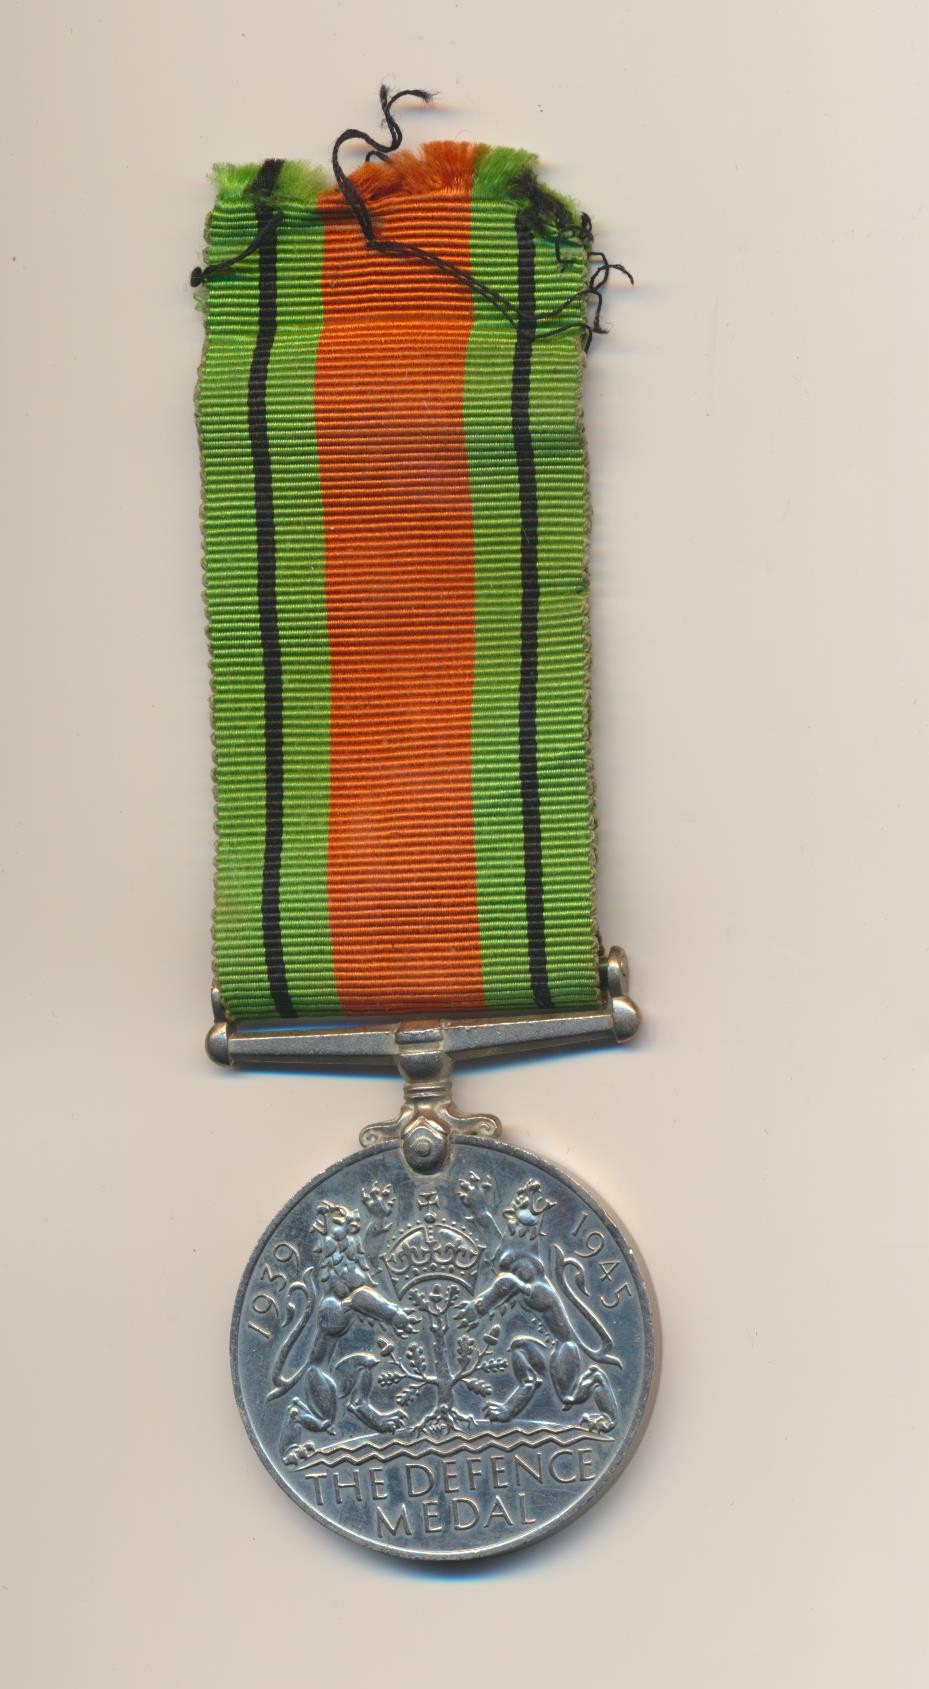 BRITISH COMMONWEALTH 1939-45 DEFENCE MEDAL